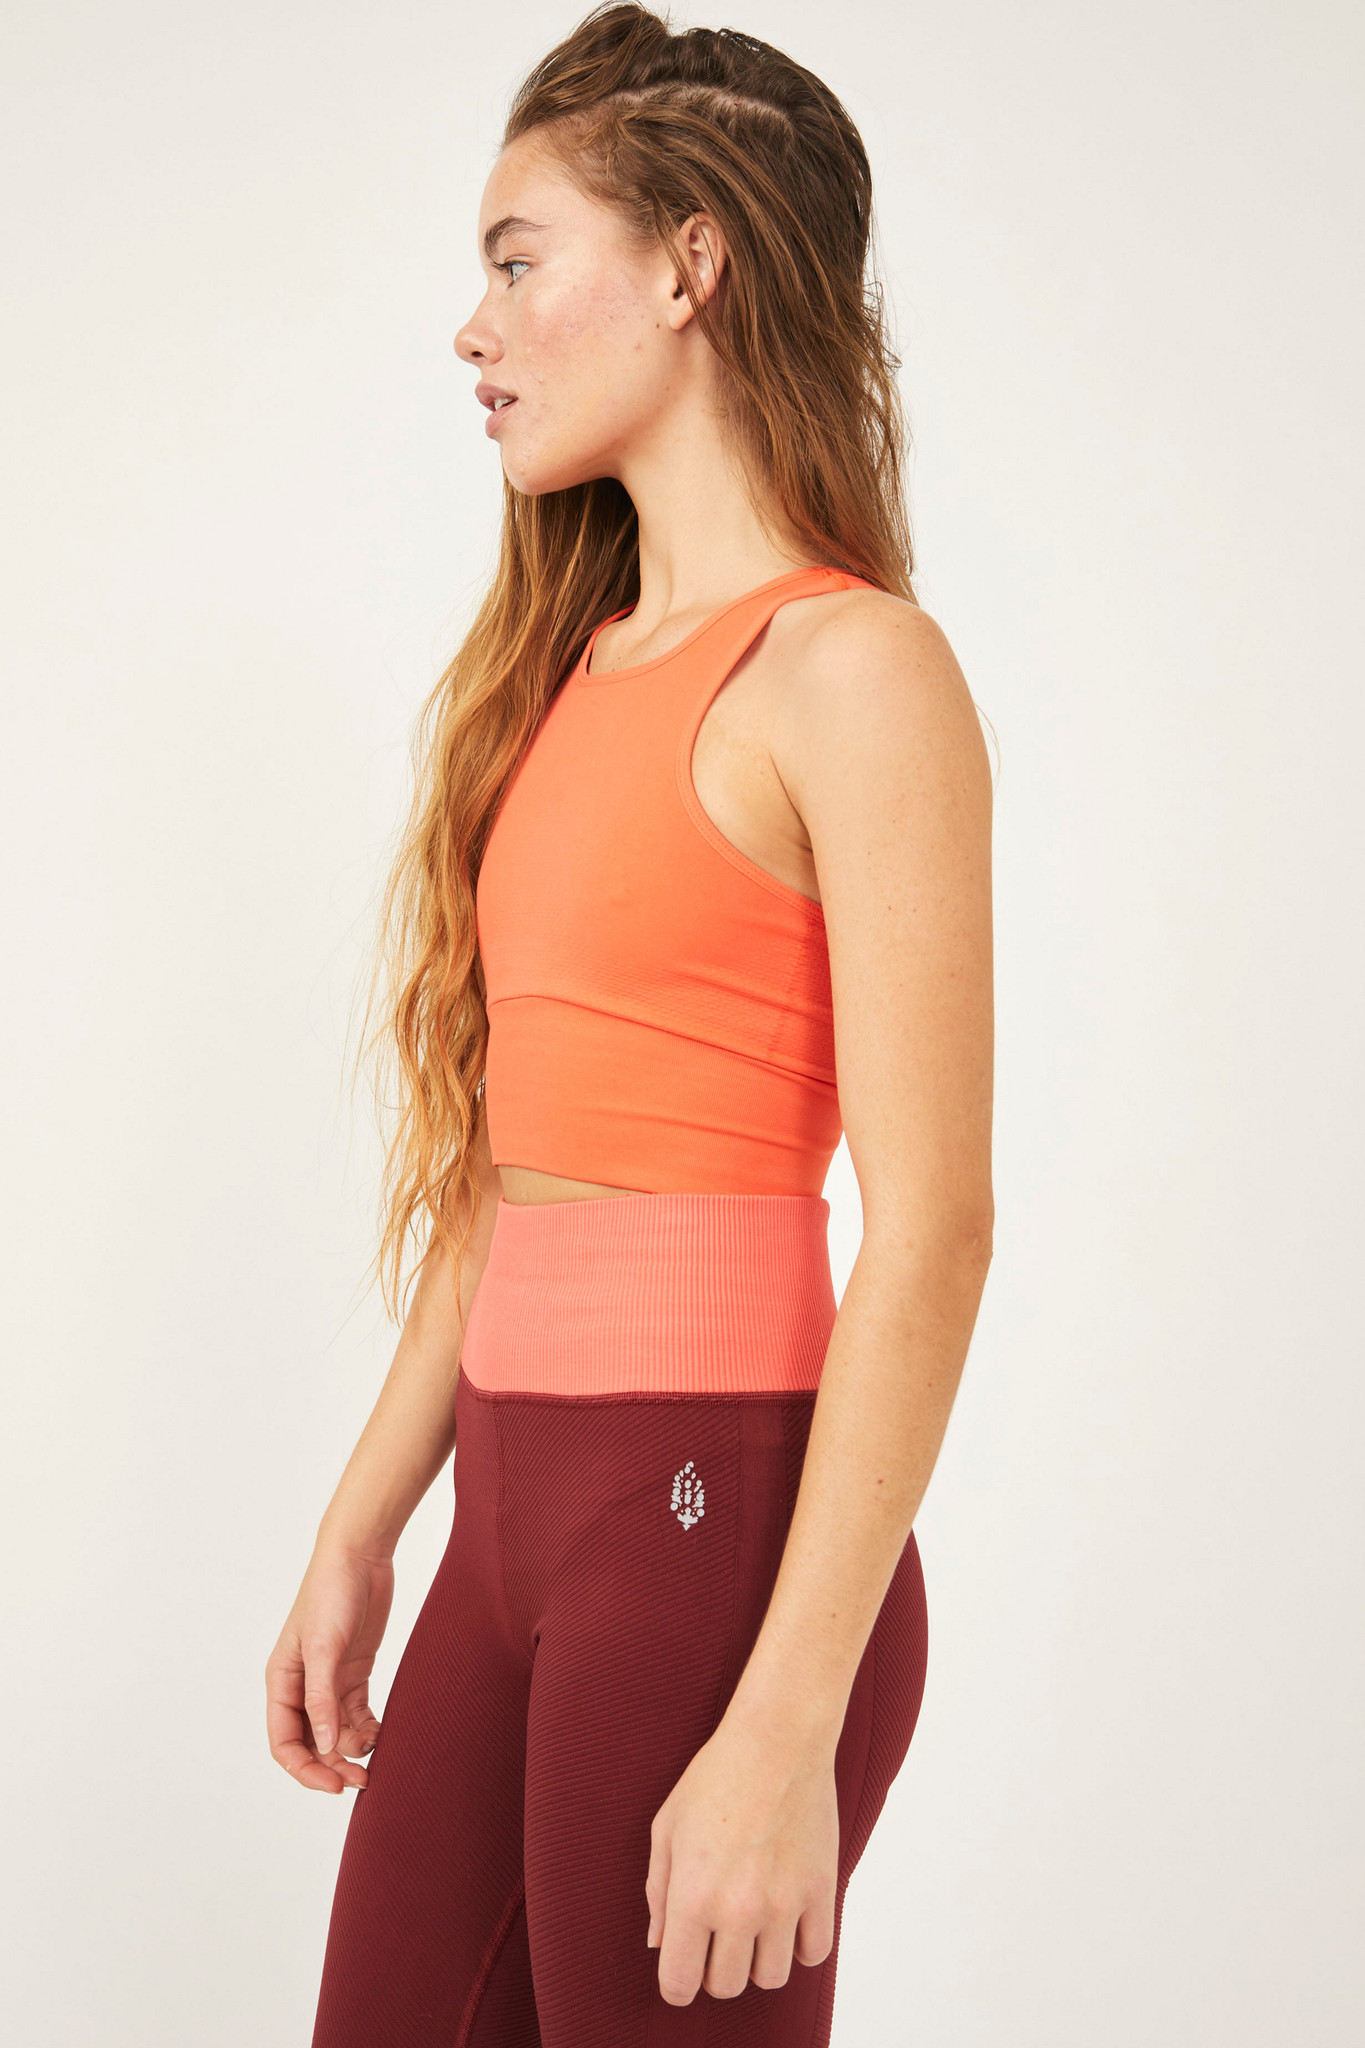 Barely There Sports Bra by FP Movement at Free People  Climbing outfits,  Rock climbing outfit, Climbing outfit woman